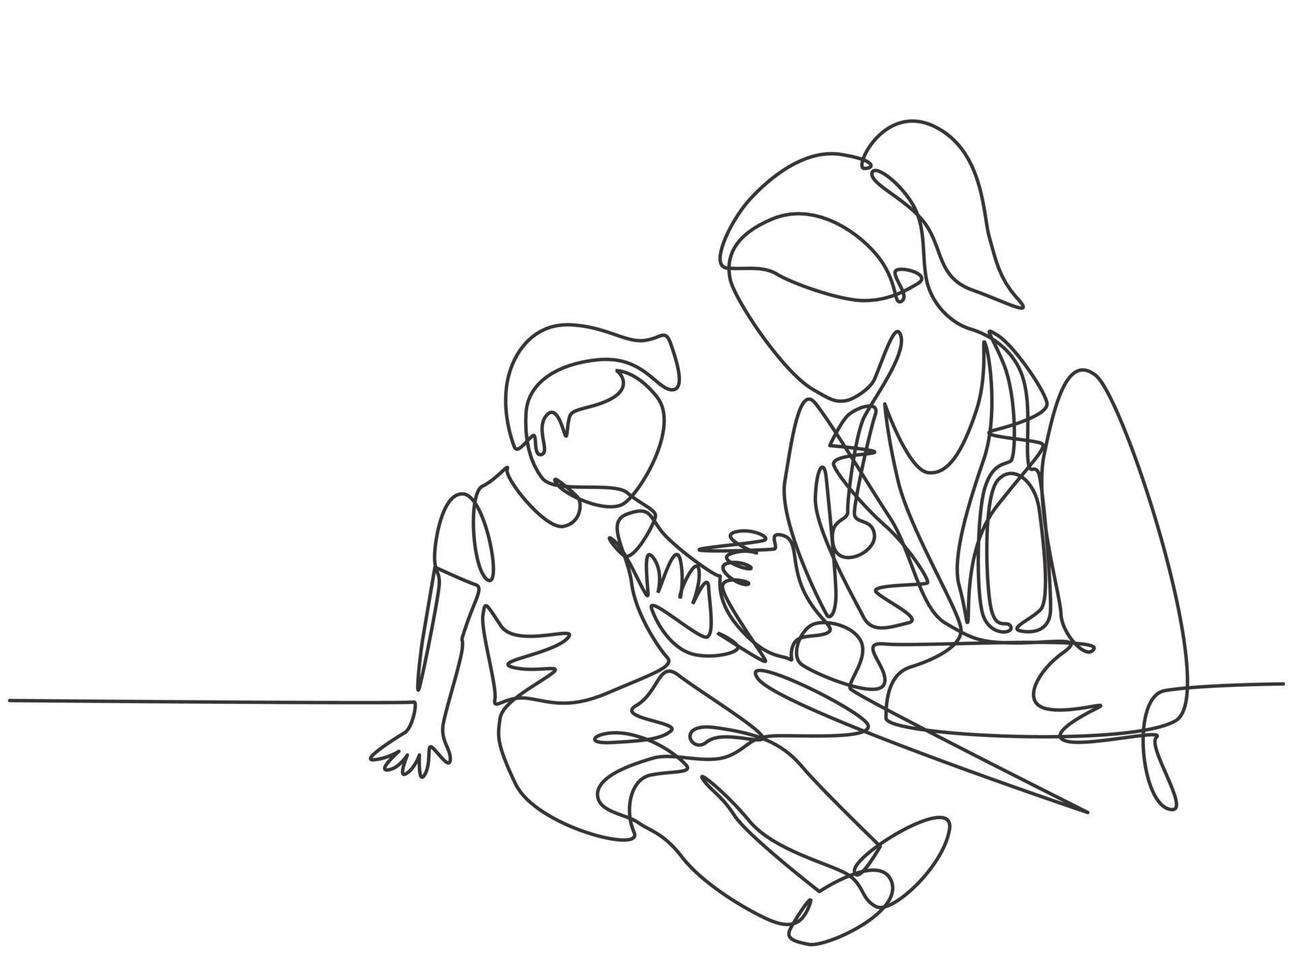 Single continuous line drawing of female pediatric doctor giving vaccine immunization injection to young boy patient. Medical health care treatment concept one line draw design vector illustration